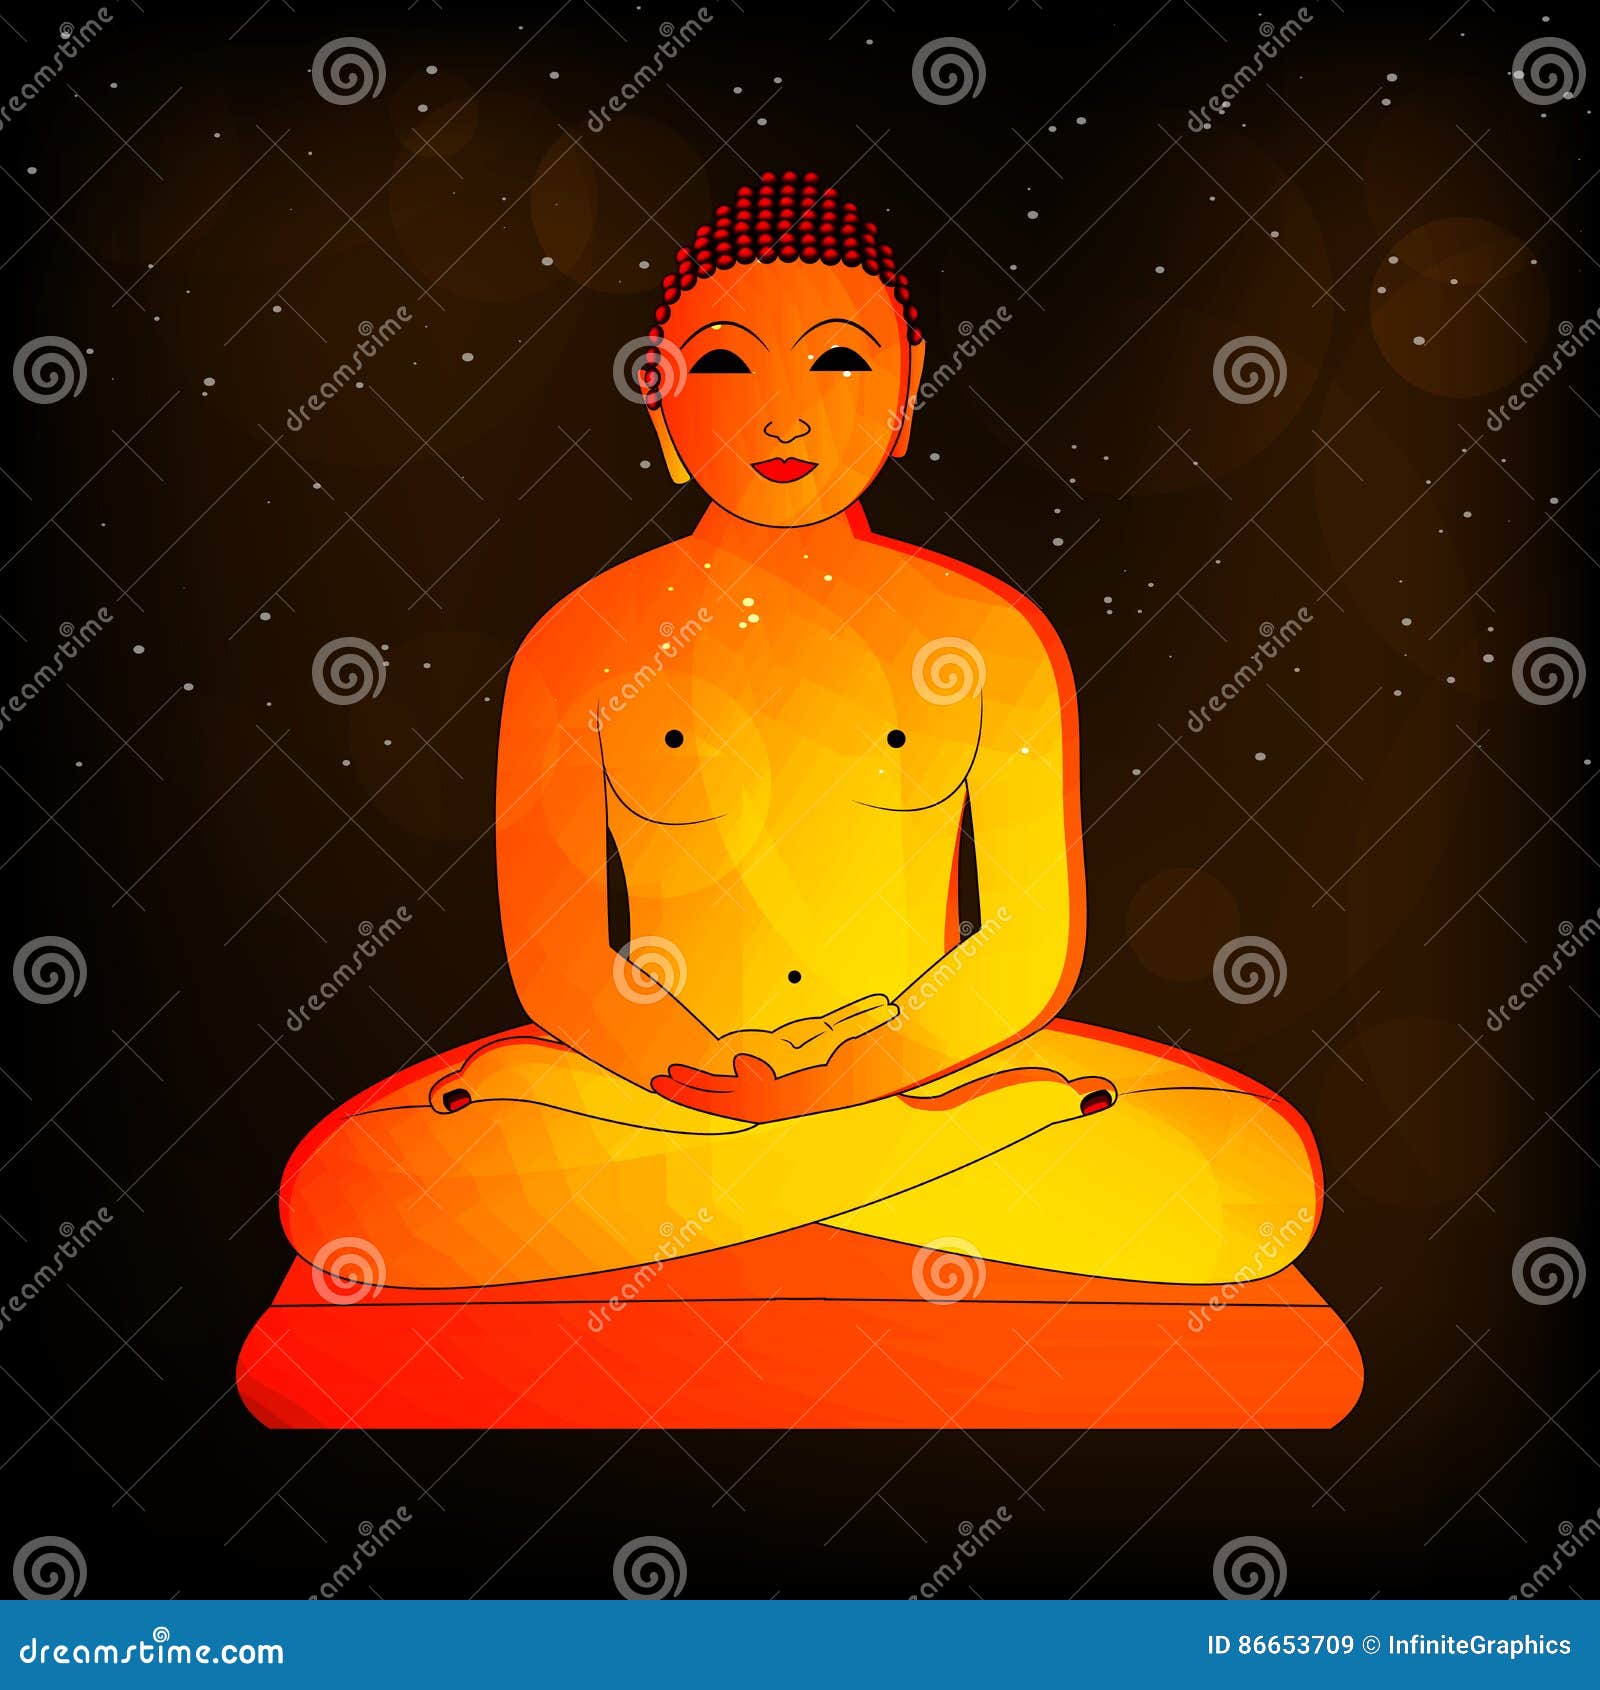 SHSWorks Lord Mahavira Framed Digital Reprint Wall Art Canvas Painting  Signed by Artist  Copyright Protected Artwork Multicolour 15x17 Inch   Amazonin Home  Kitchen